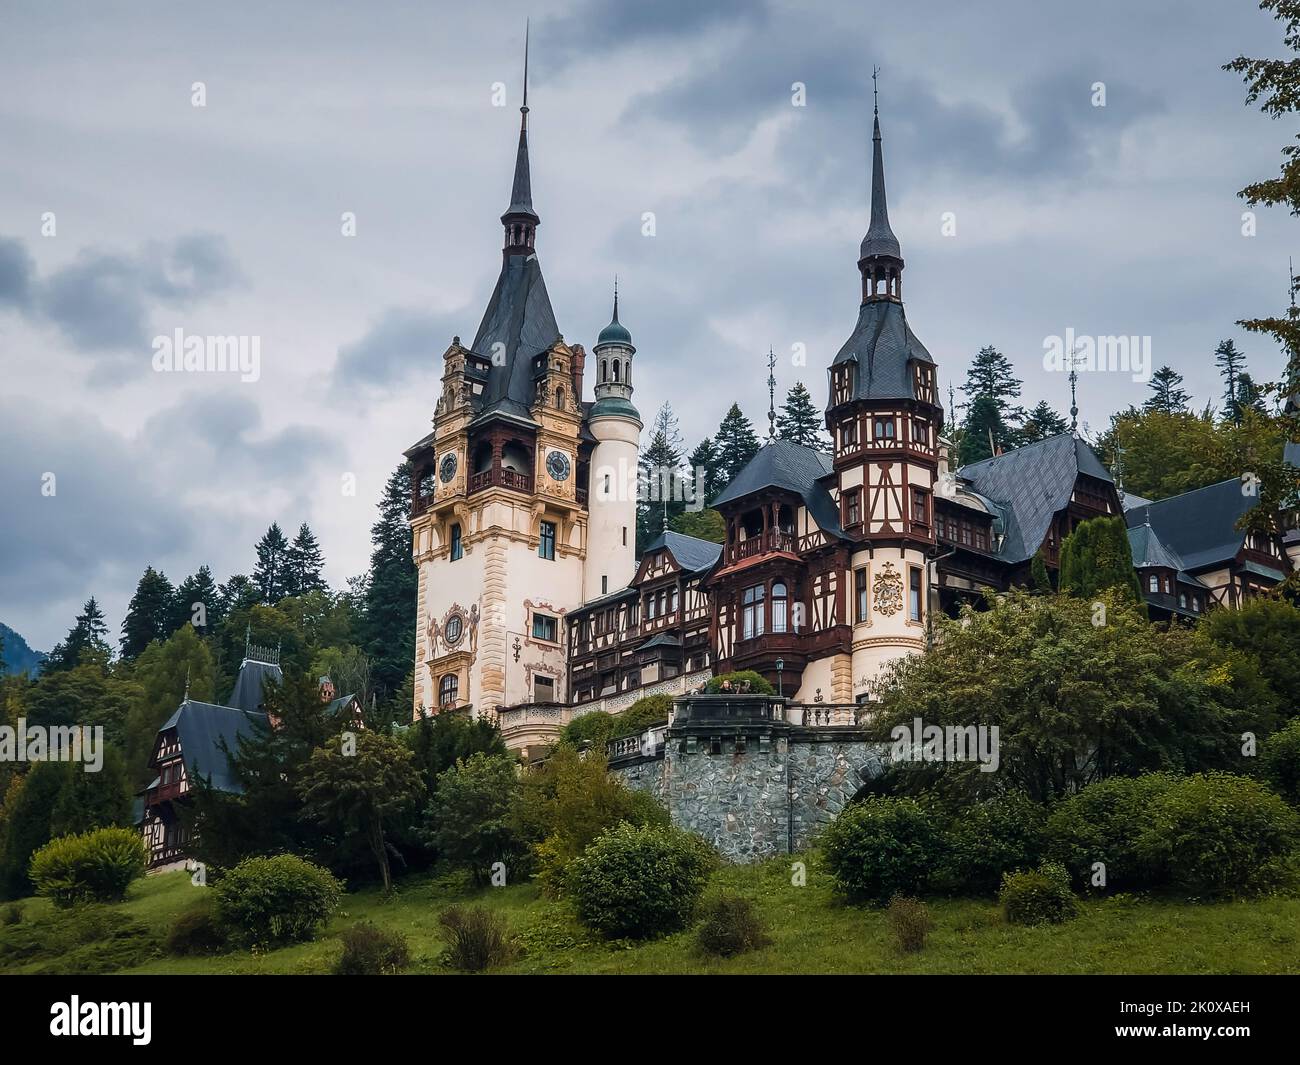 Peles Castle in Sinaia, Romania. Famous Neo-Renaissance palace of the royal family located in the heart of Carpathian mountains. Stock Photo